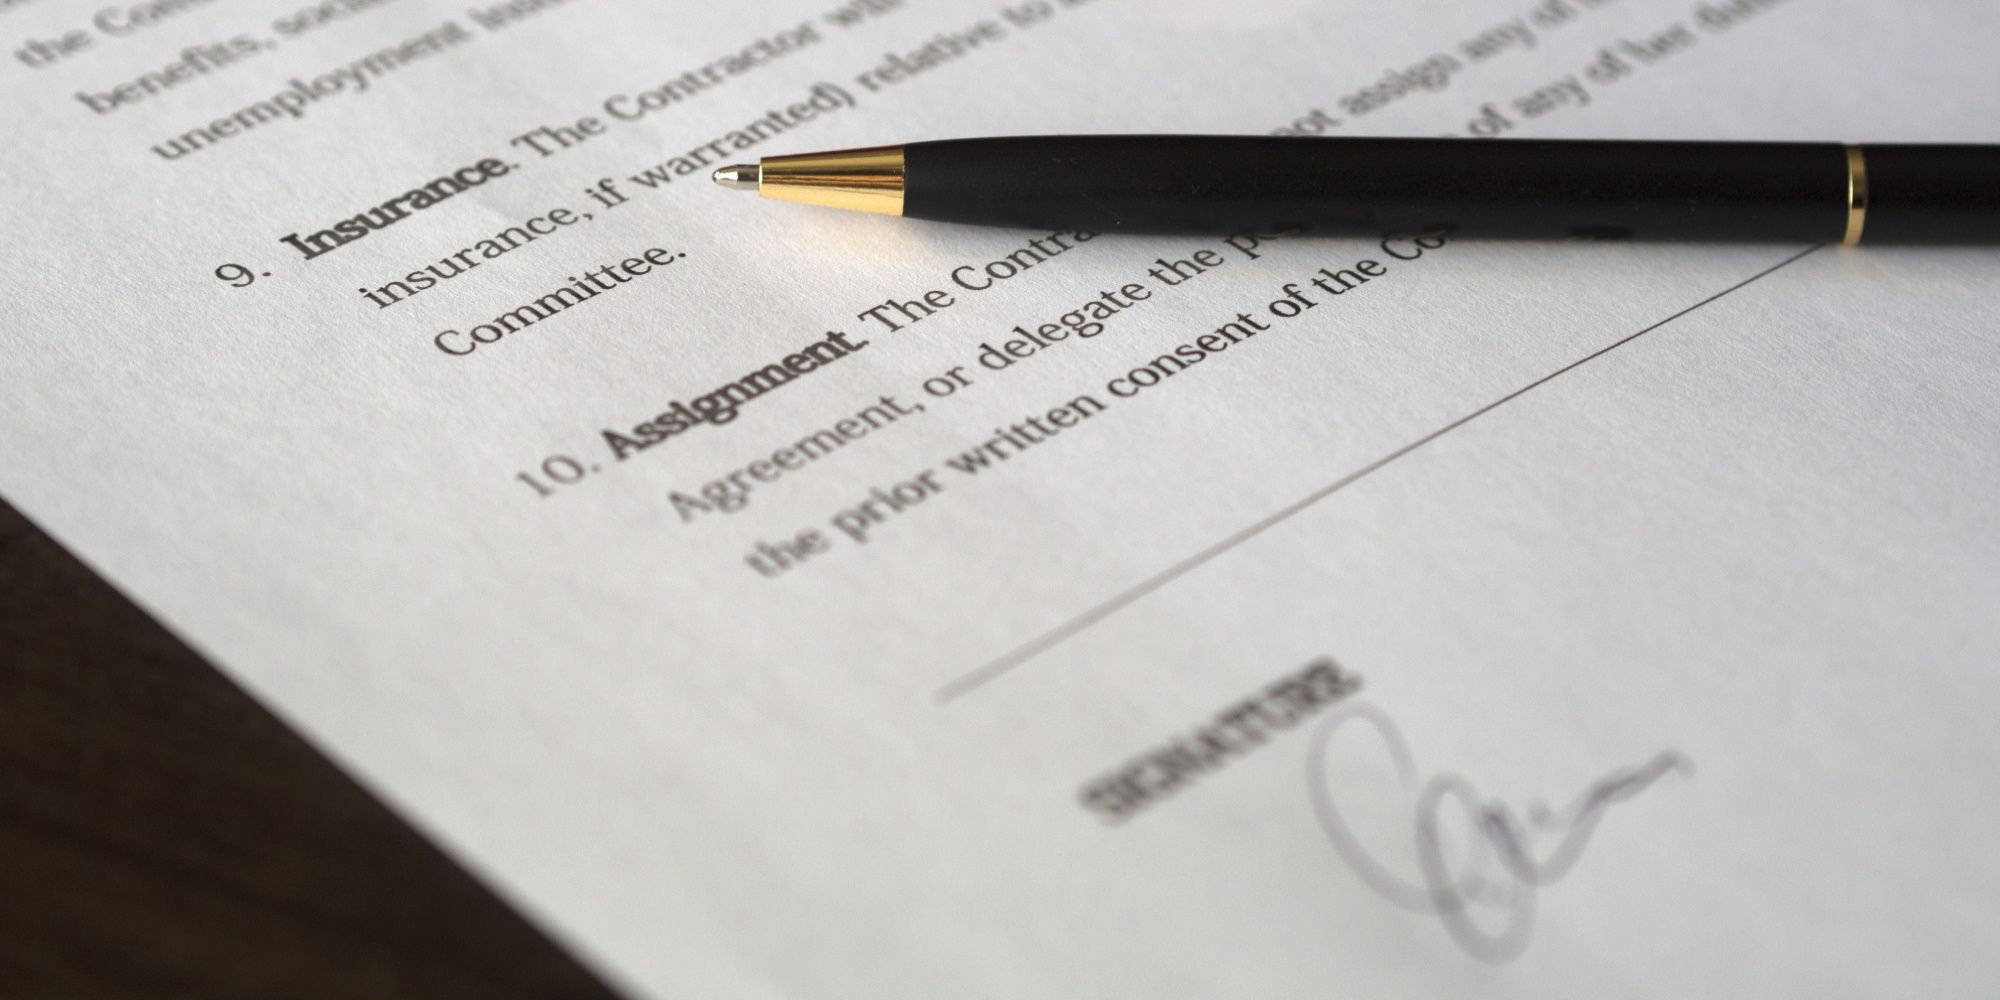 Black pen on top of signed employment agreement